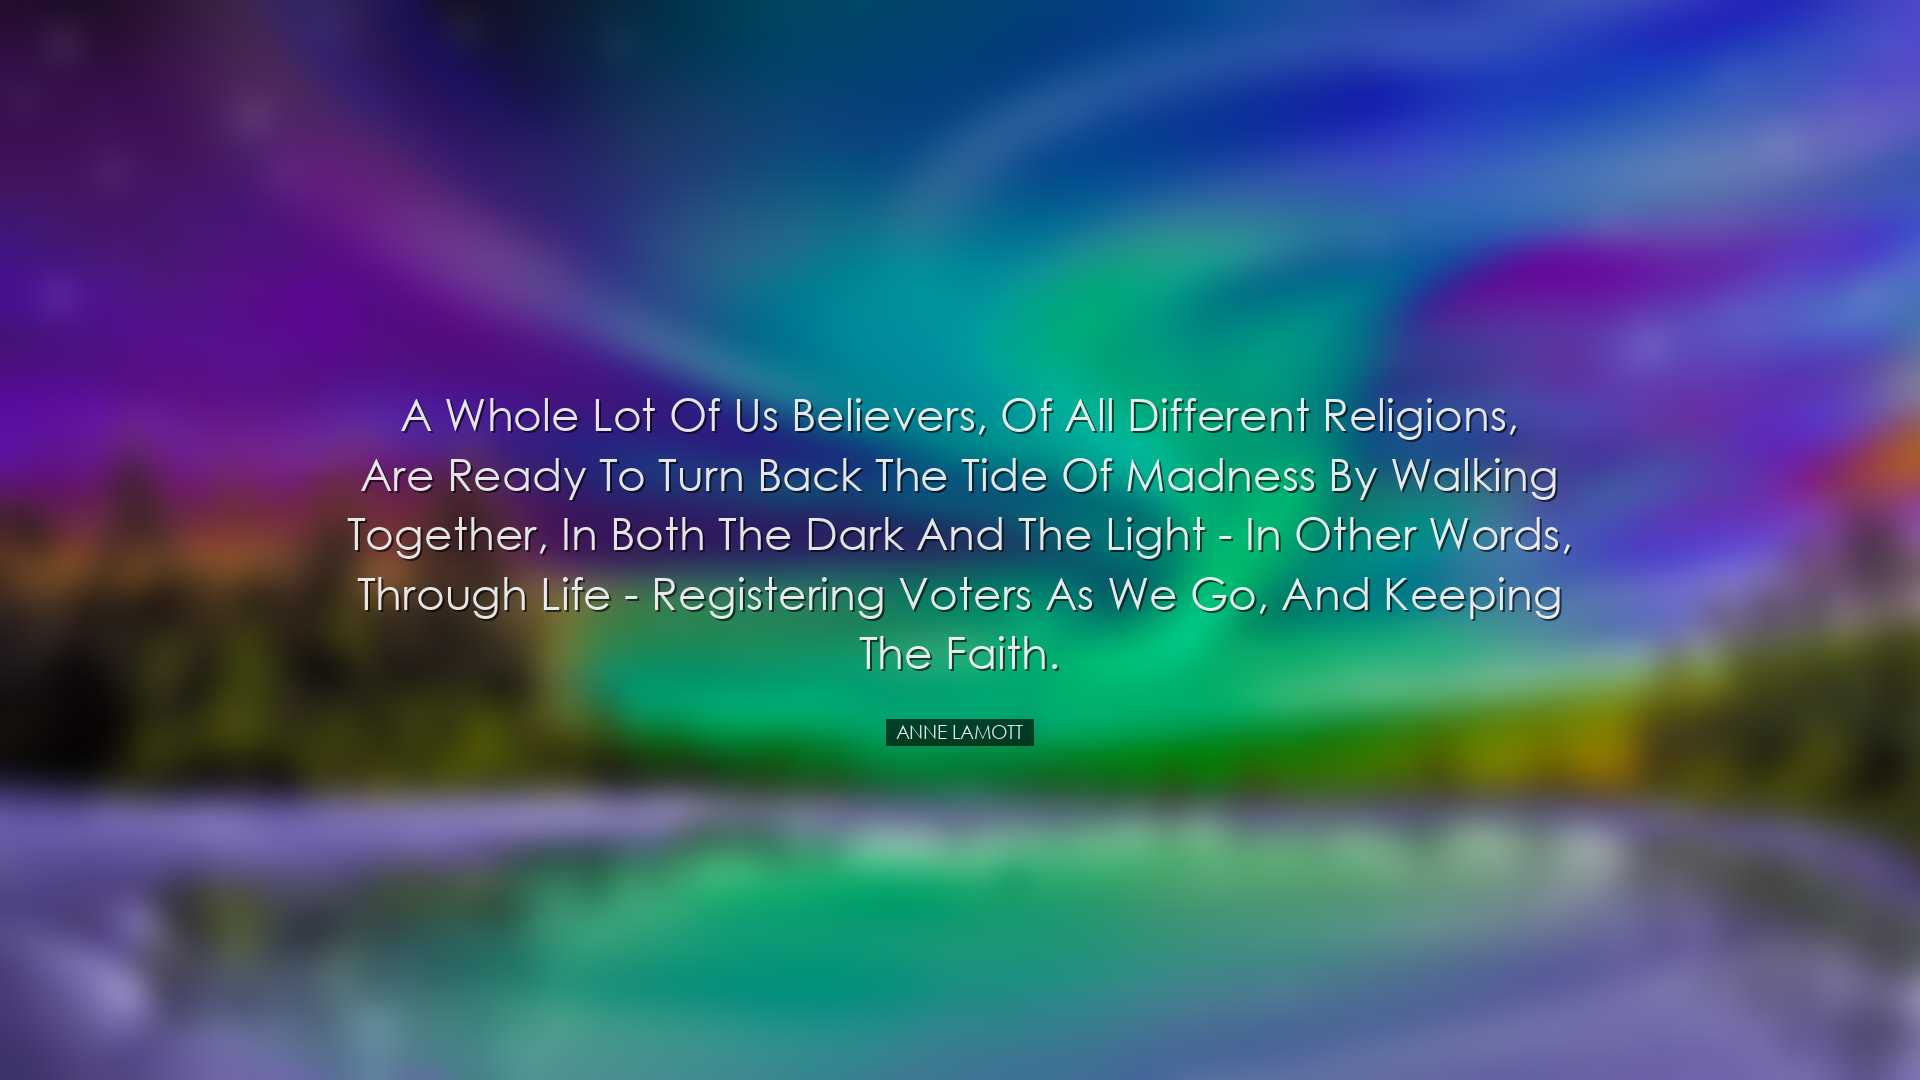 A whole lot of us believers, of all different religions, are ready